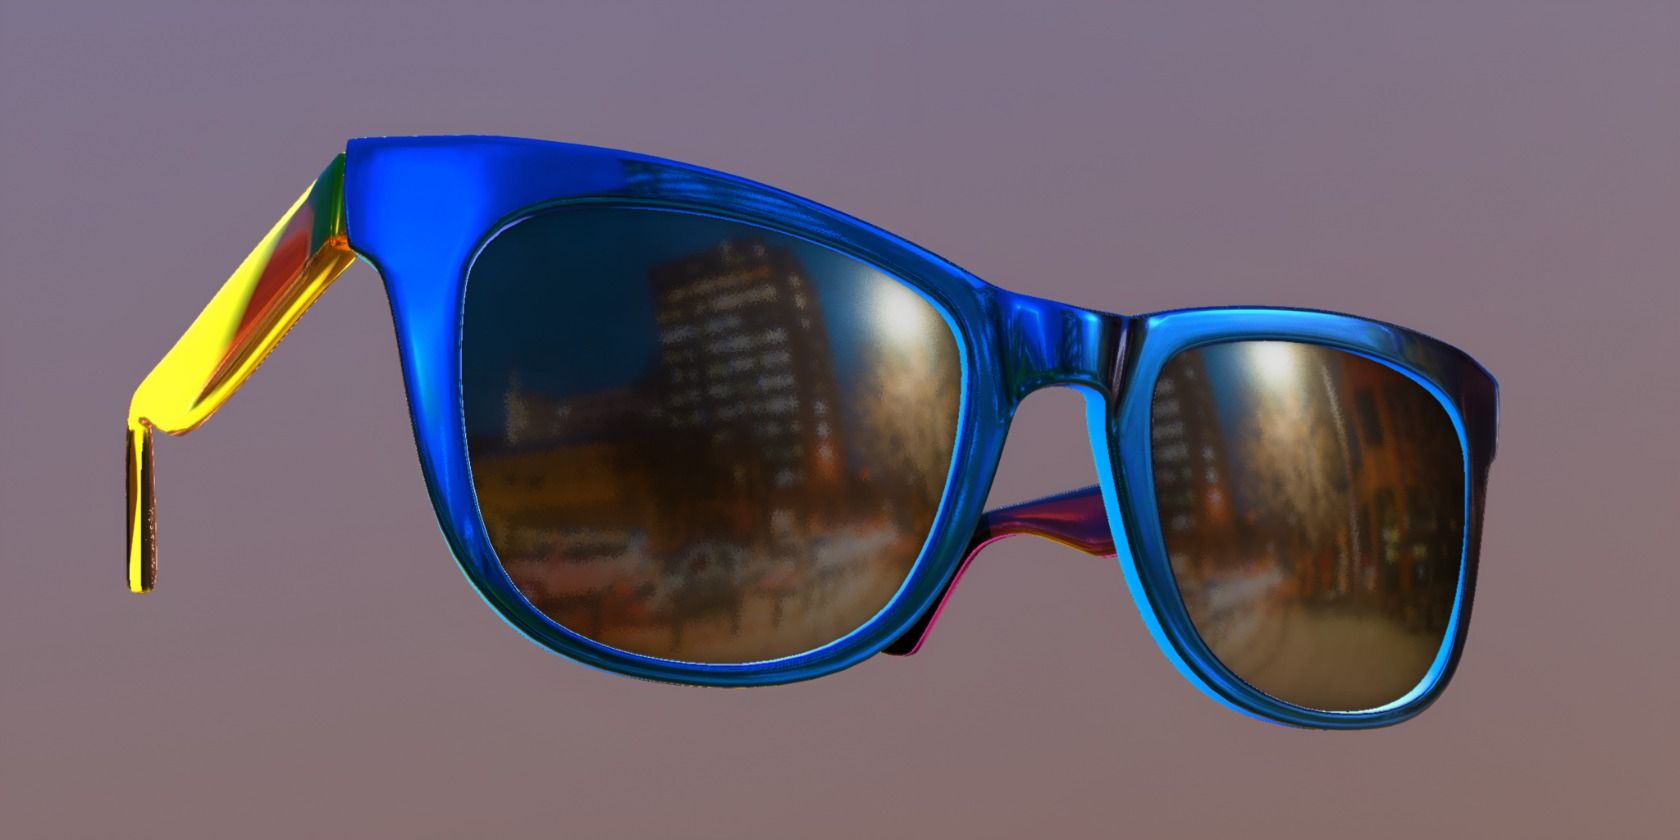 3D model of blue and yellow framed sunglasses in 3D nightlife environment 